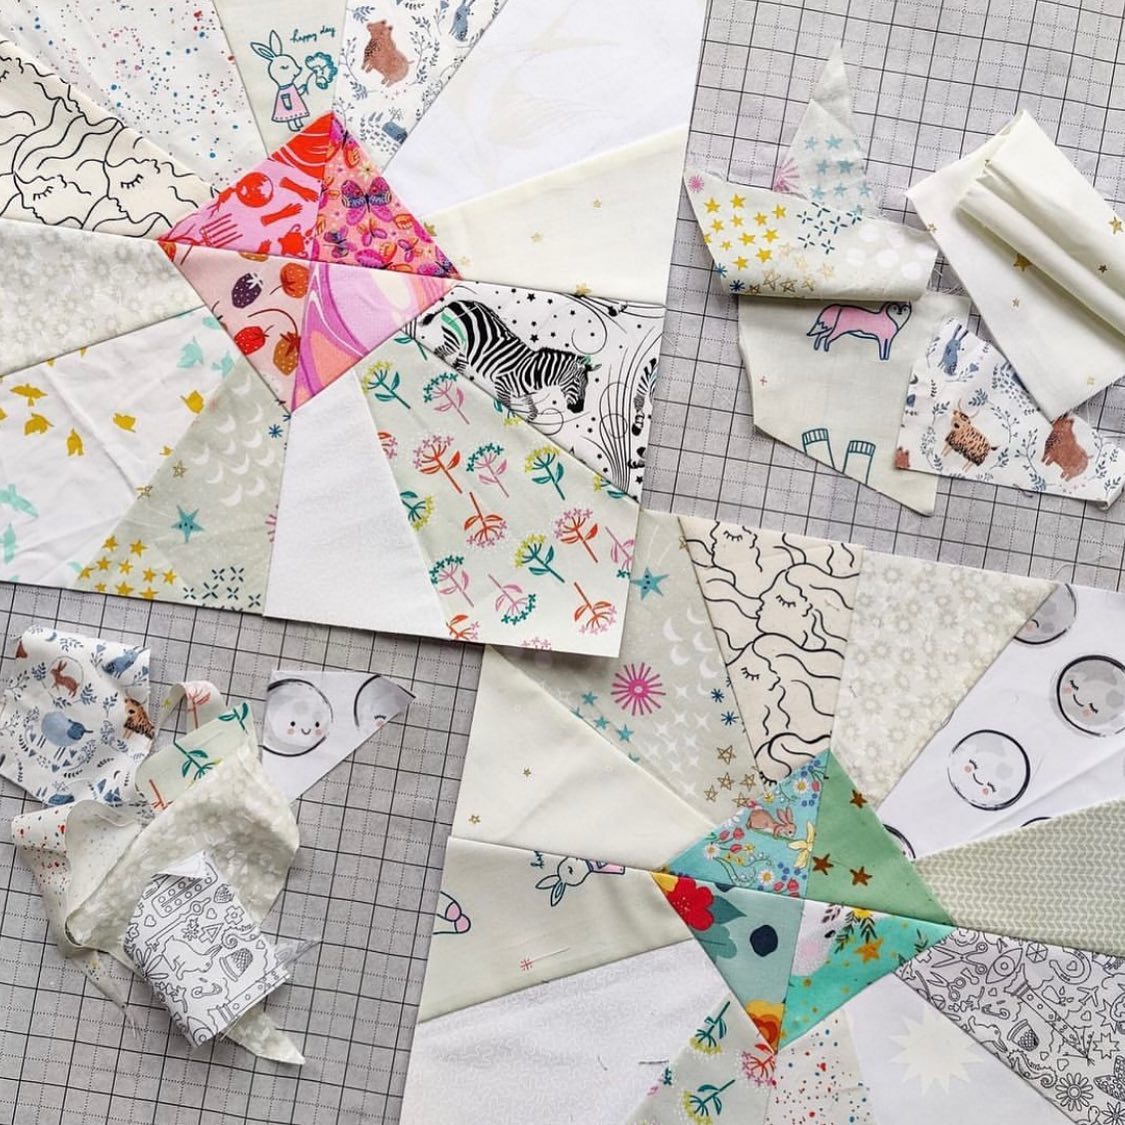 Quilt block by Silvers Stitches